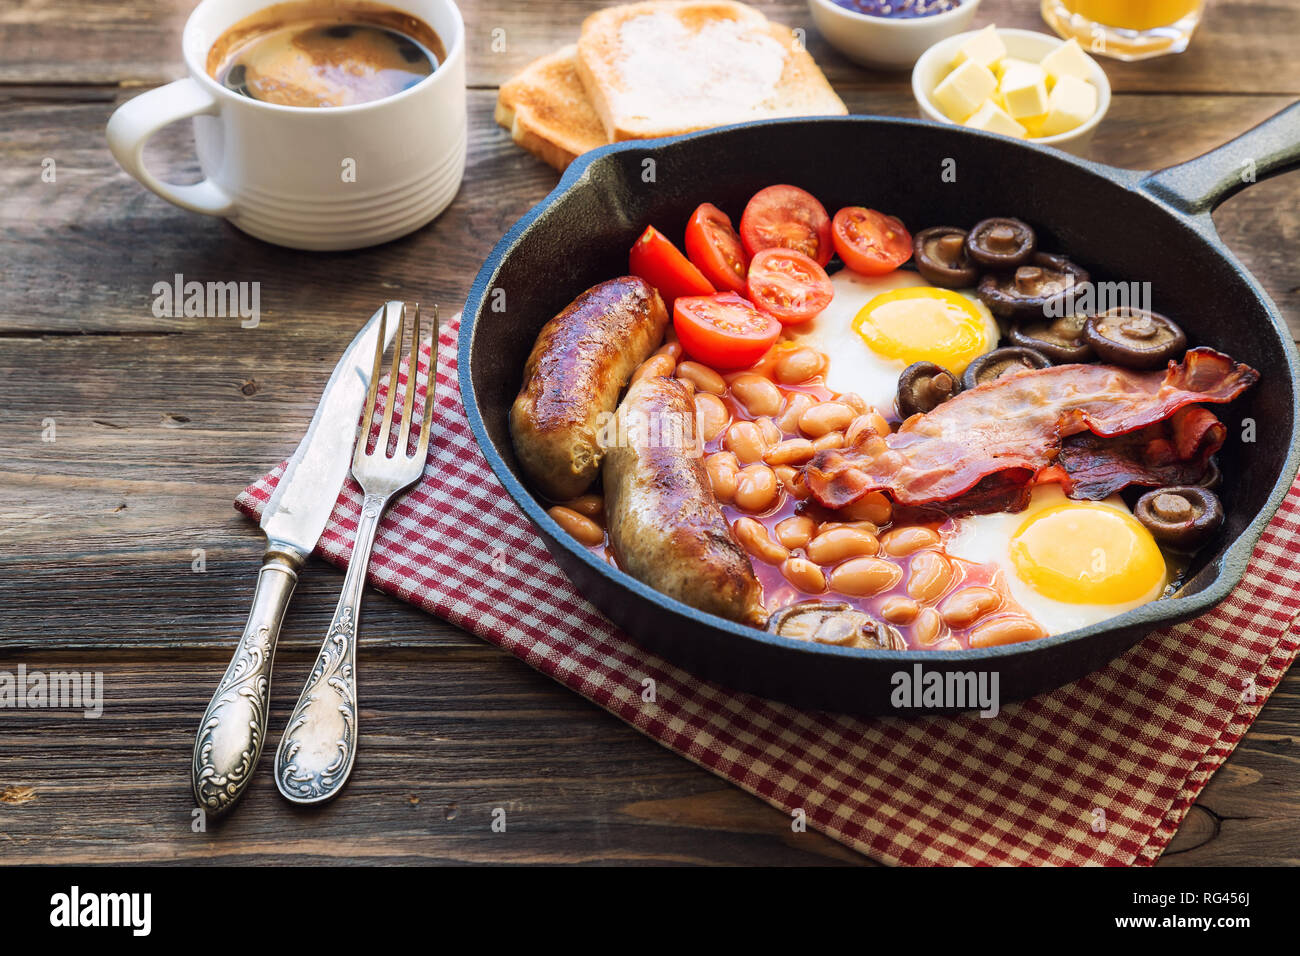 Fried eggs, sausages, bacon, beans and mushrooms in iron skillet, toasts, coffee, butter and jam on rustic wooden background. Full english breakfast.  Stock Photo